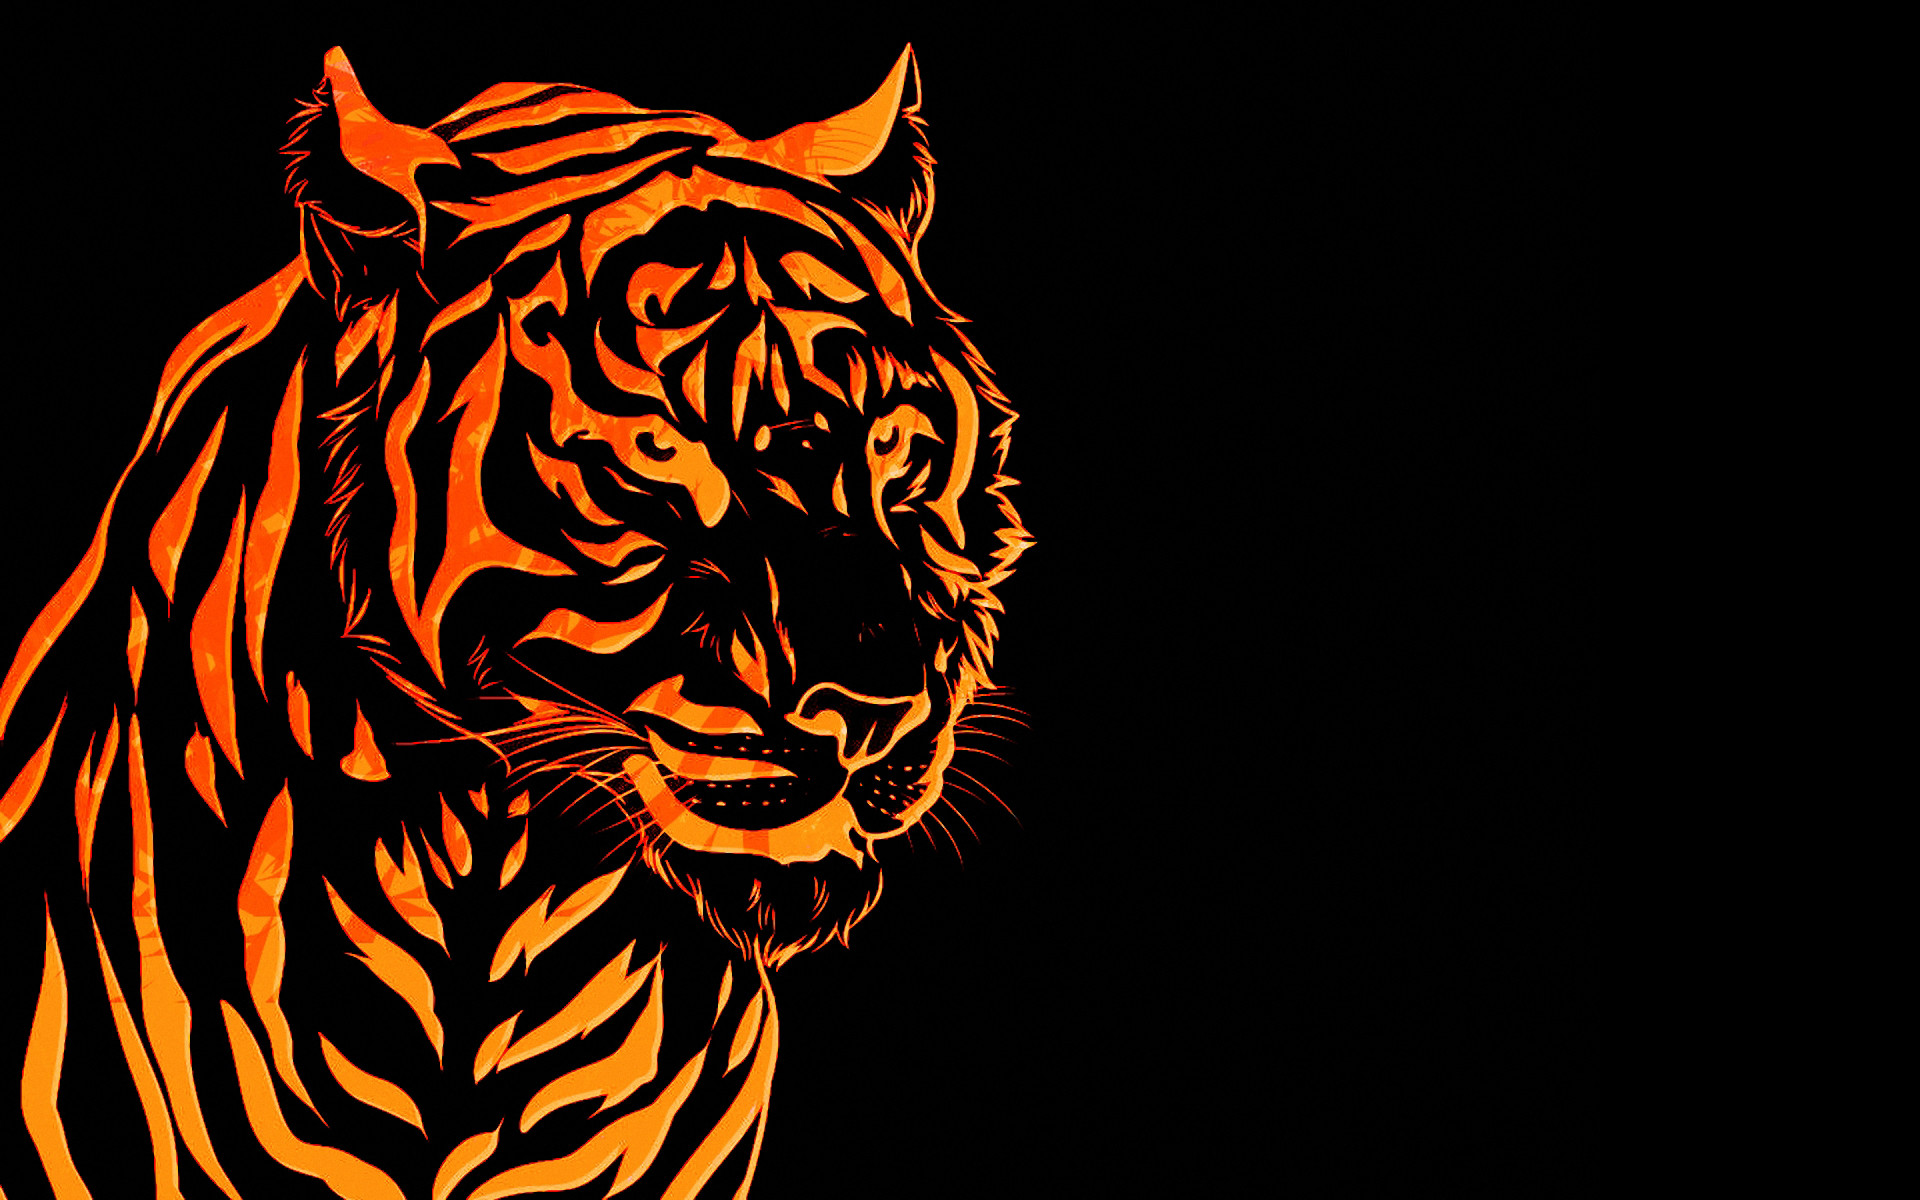 1920x1200 For those who love tigers! I made this as a pc wallpaper , drawn with  photoshop. Please give me feed back if you like this c) Fire Tiger wallpaper